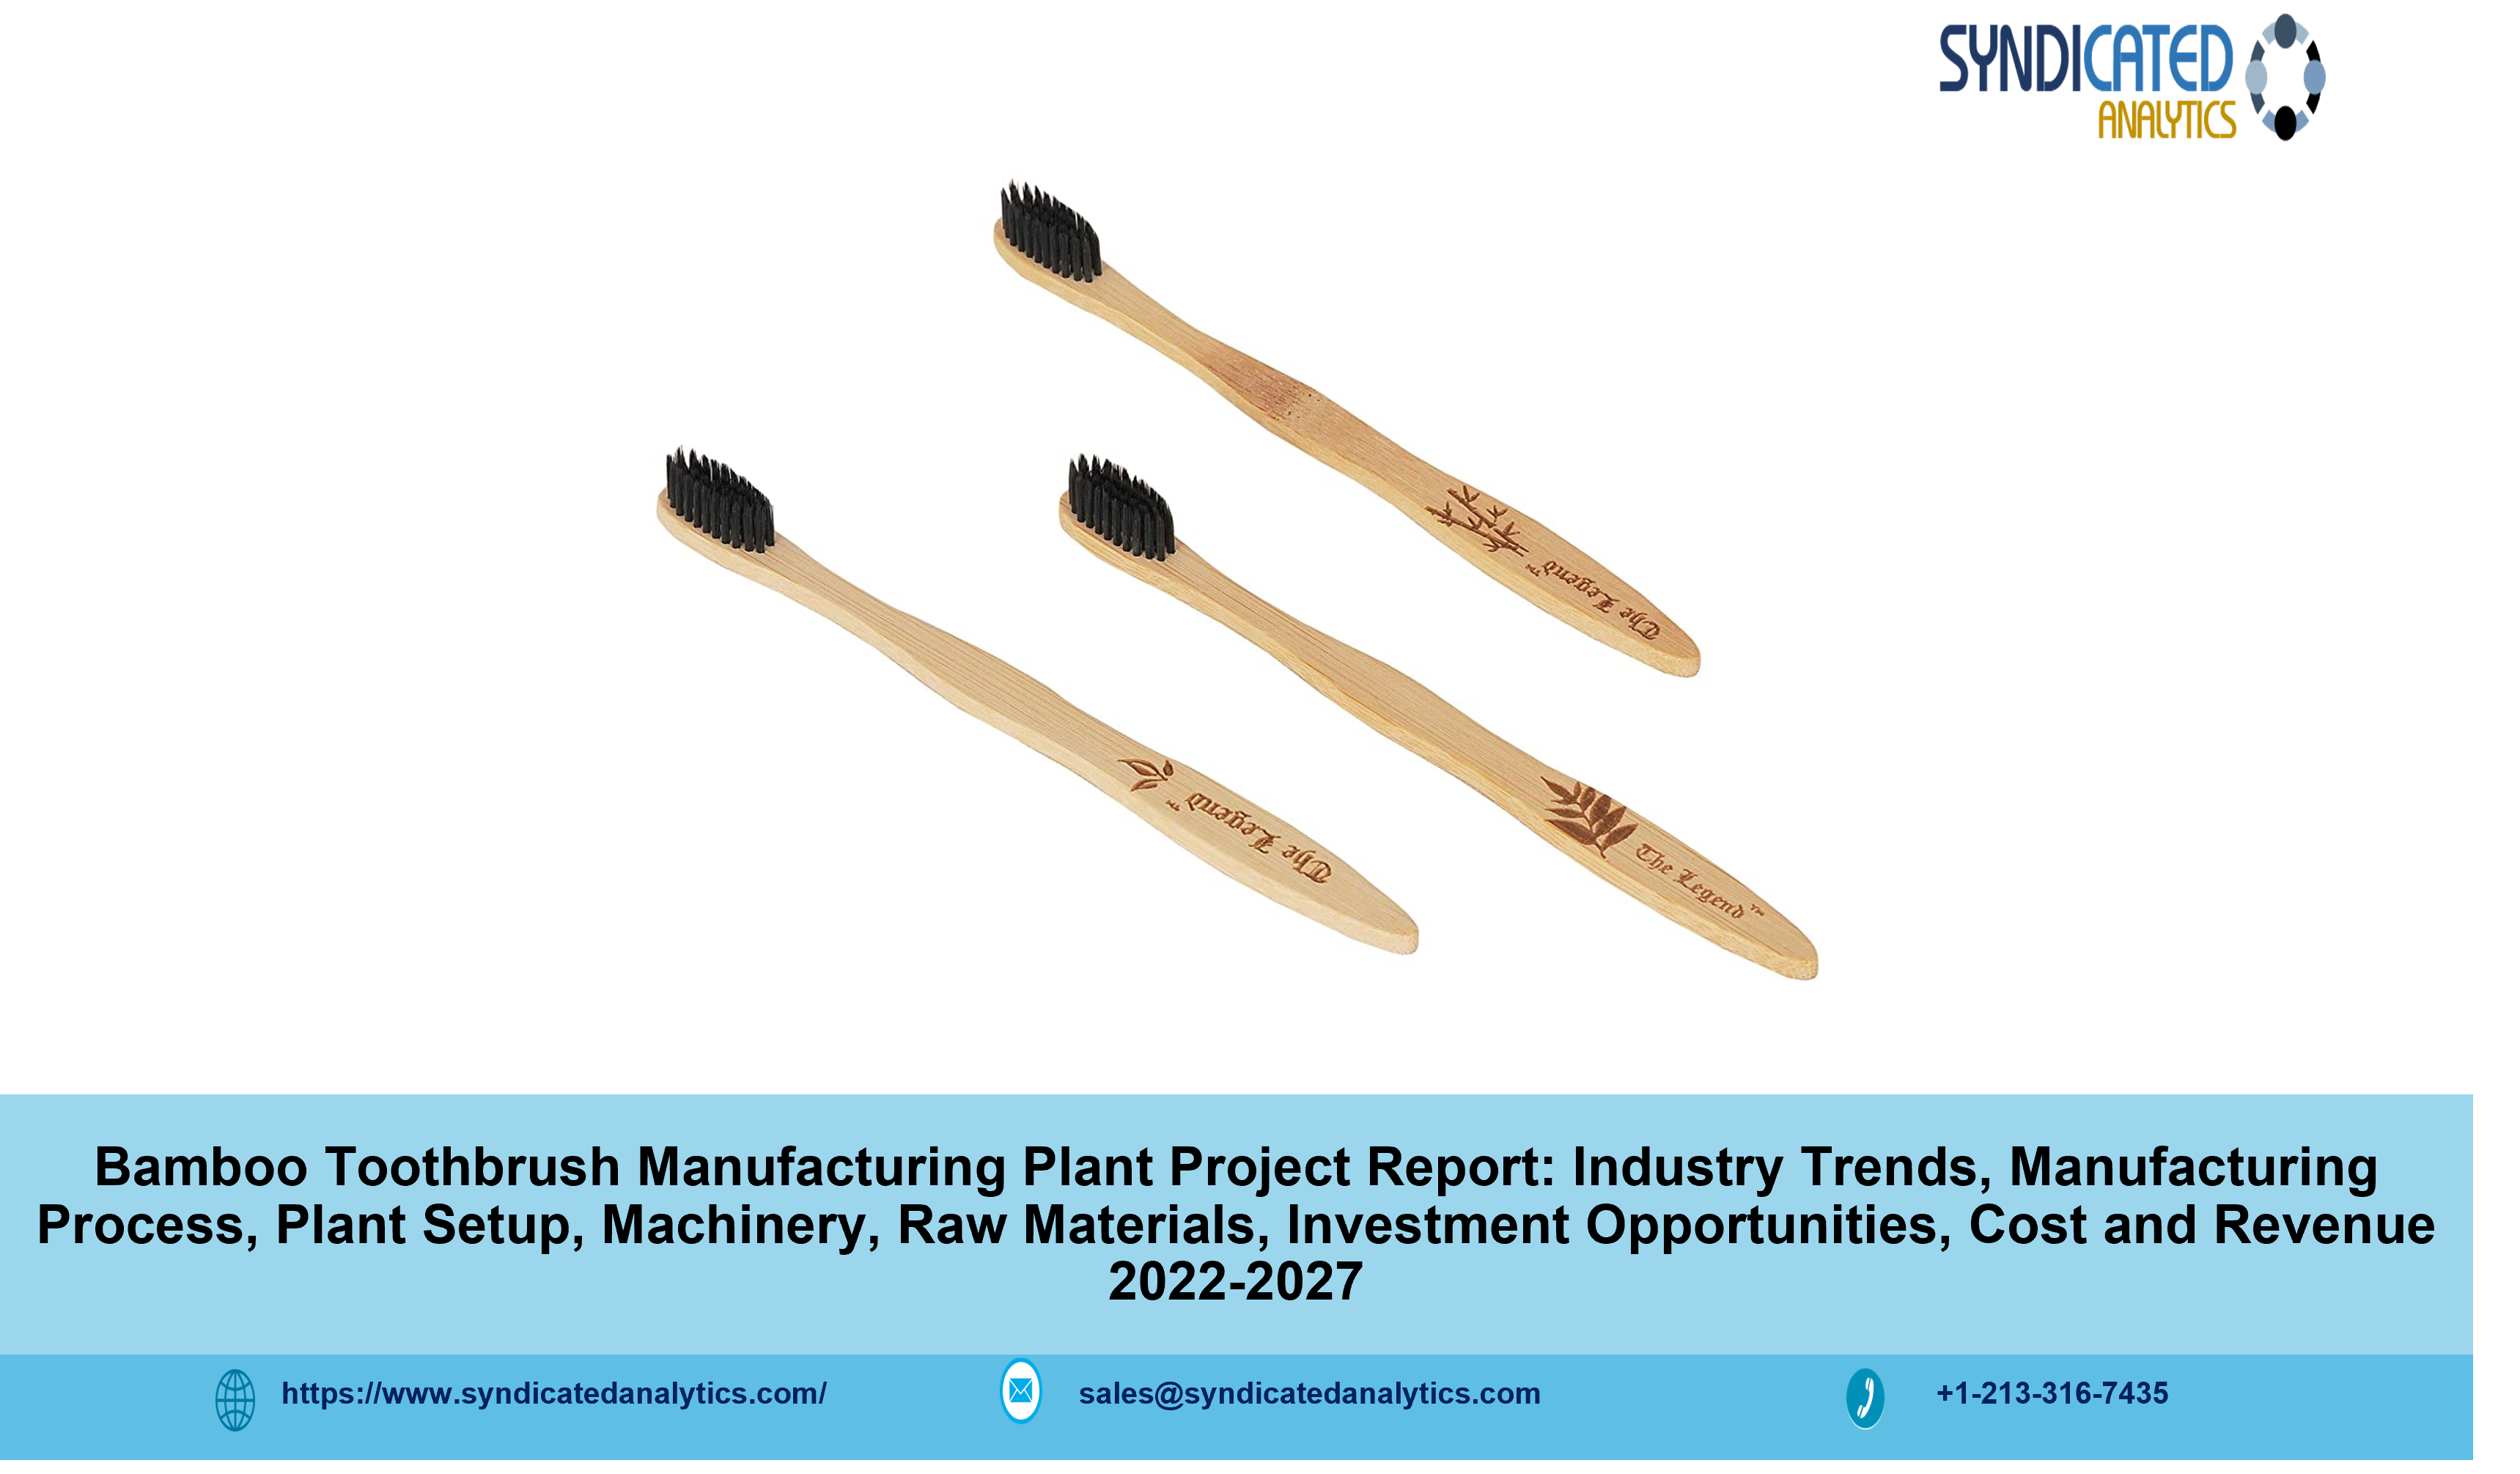 Bamboo Toothbrush Manufacturing Plant Project Report